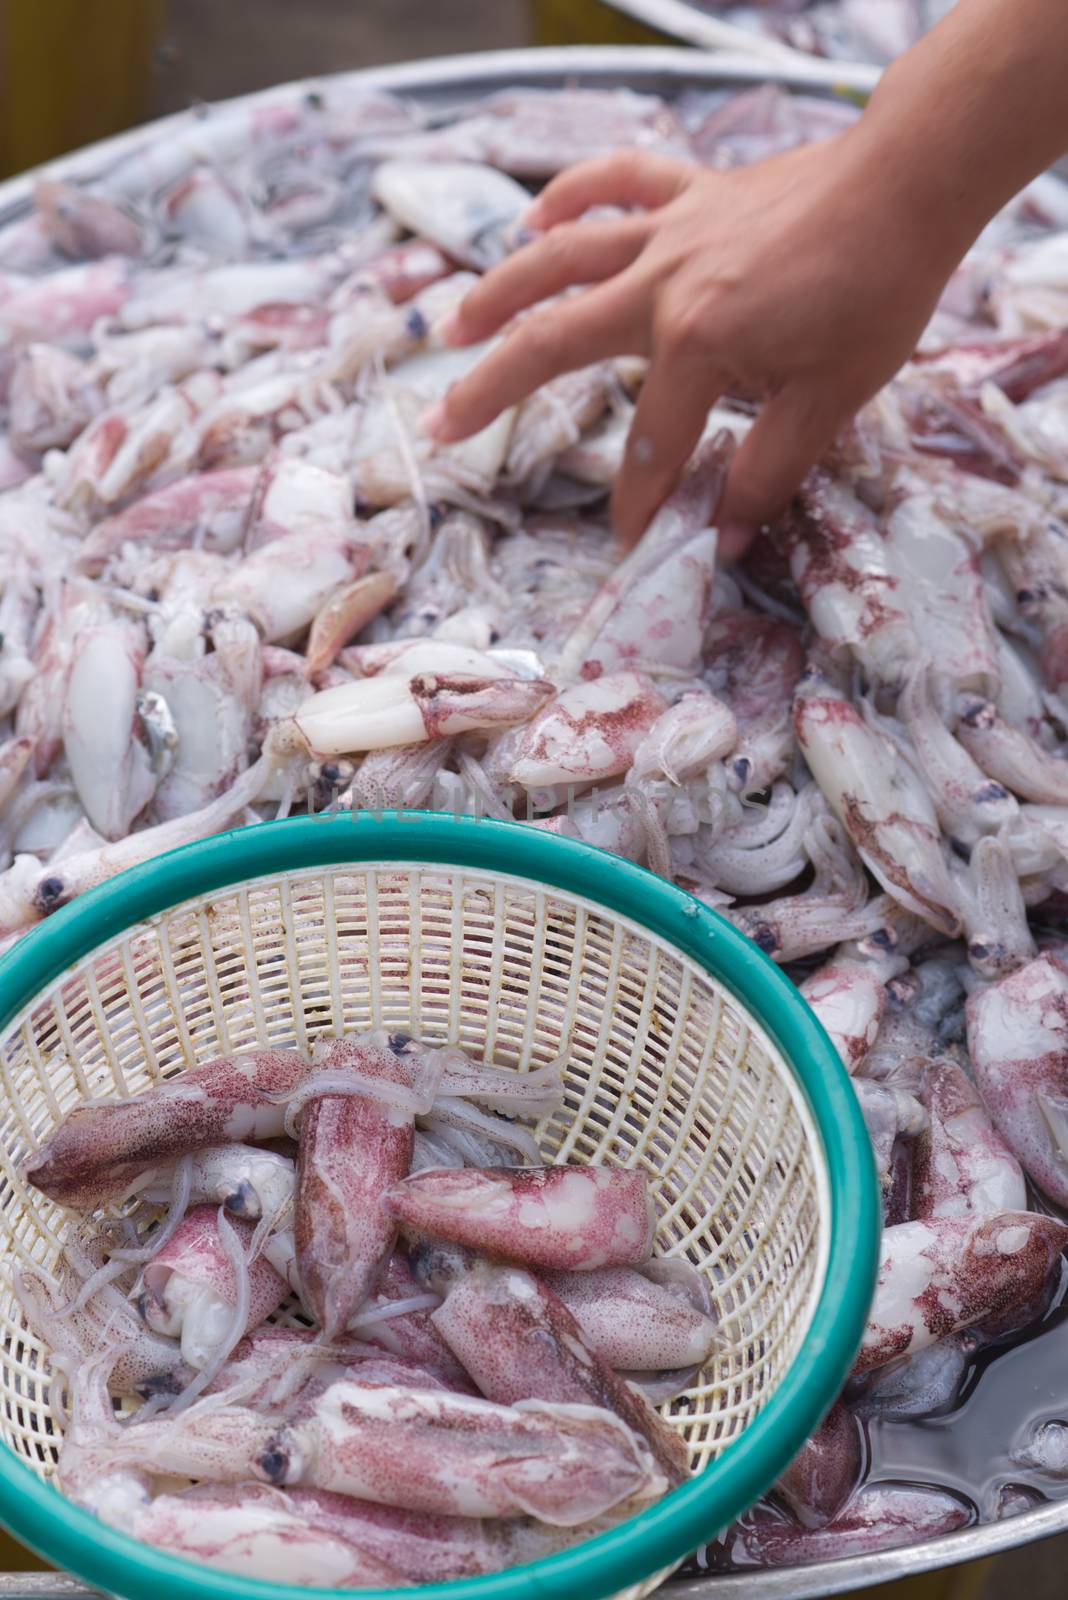 The fresh squid is in the basket and there is a blurred female hand that is picking the squid.